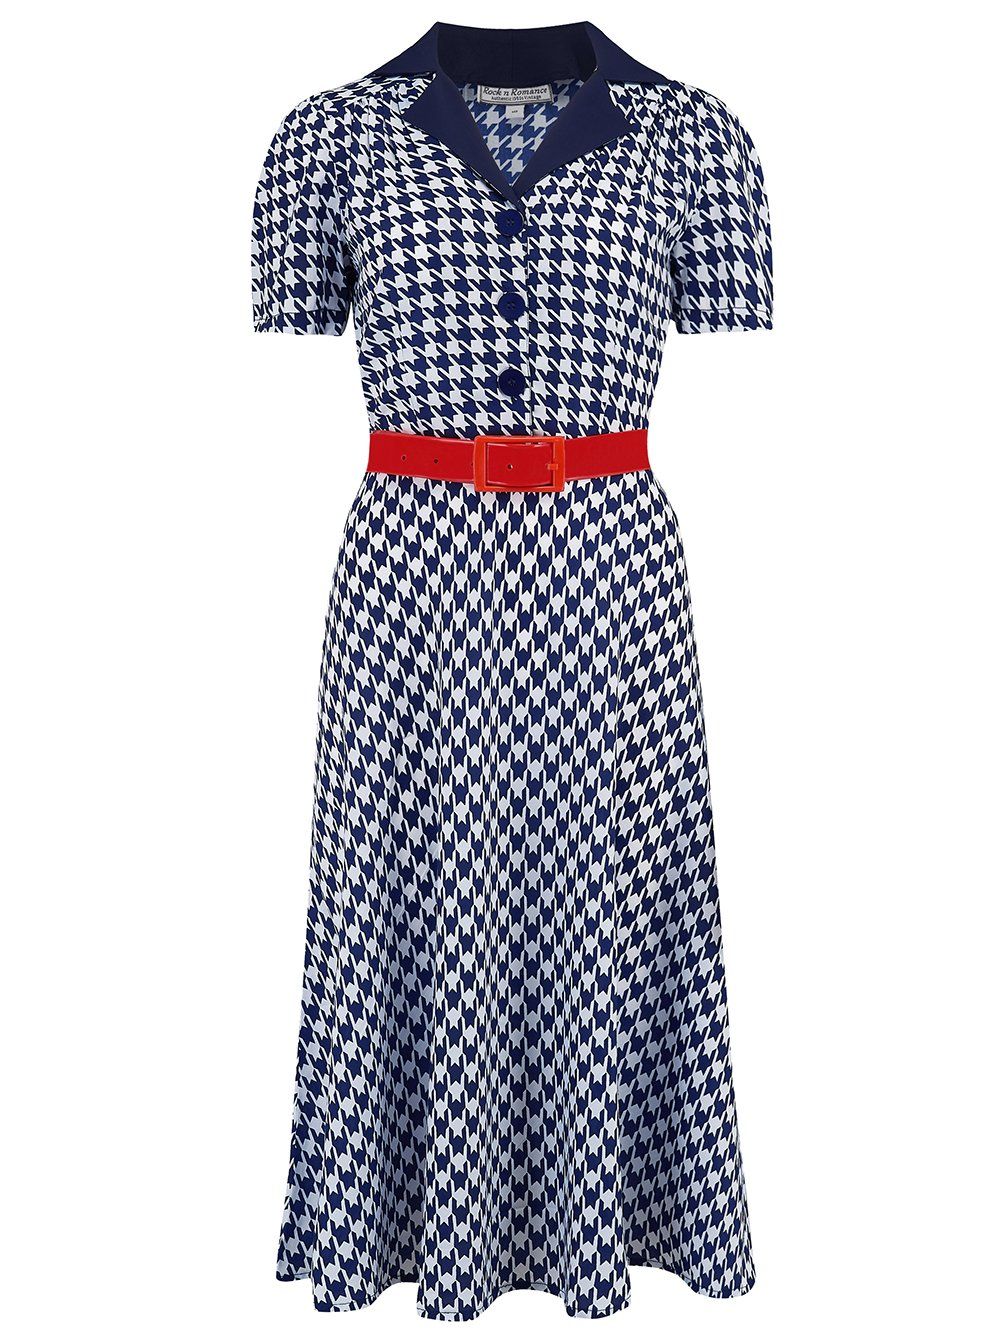 Rock N Romance Lola Shirtwaister Dress in Navy Hounds Tooth, Perfect ...